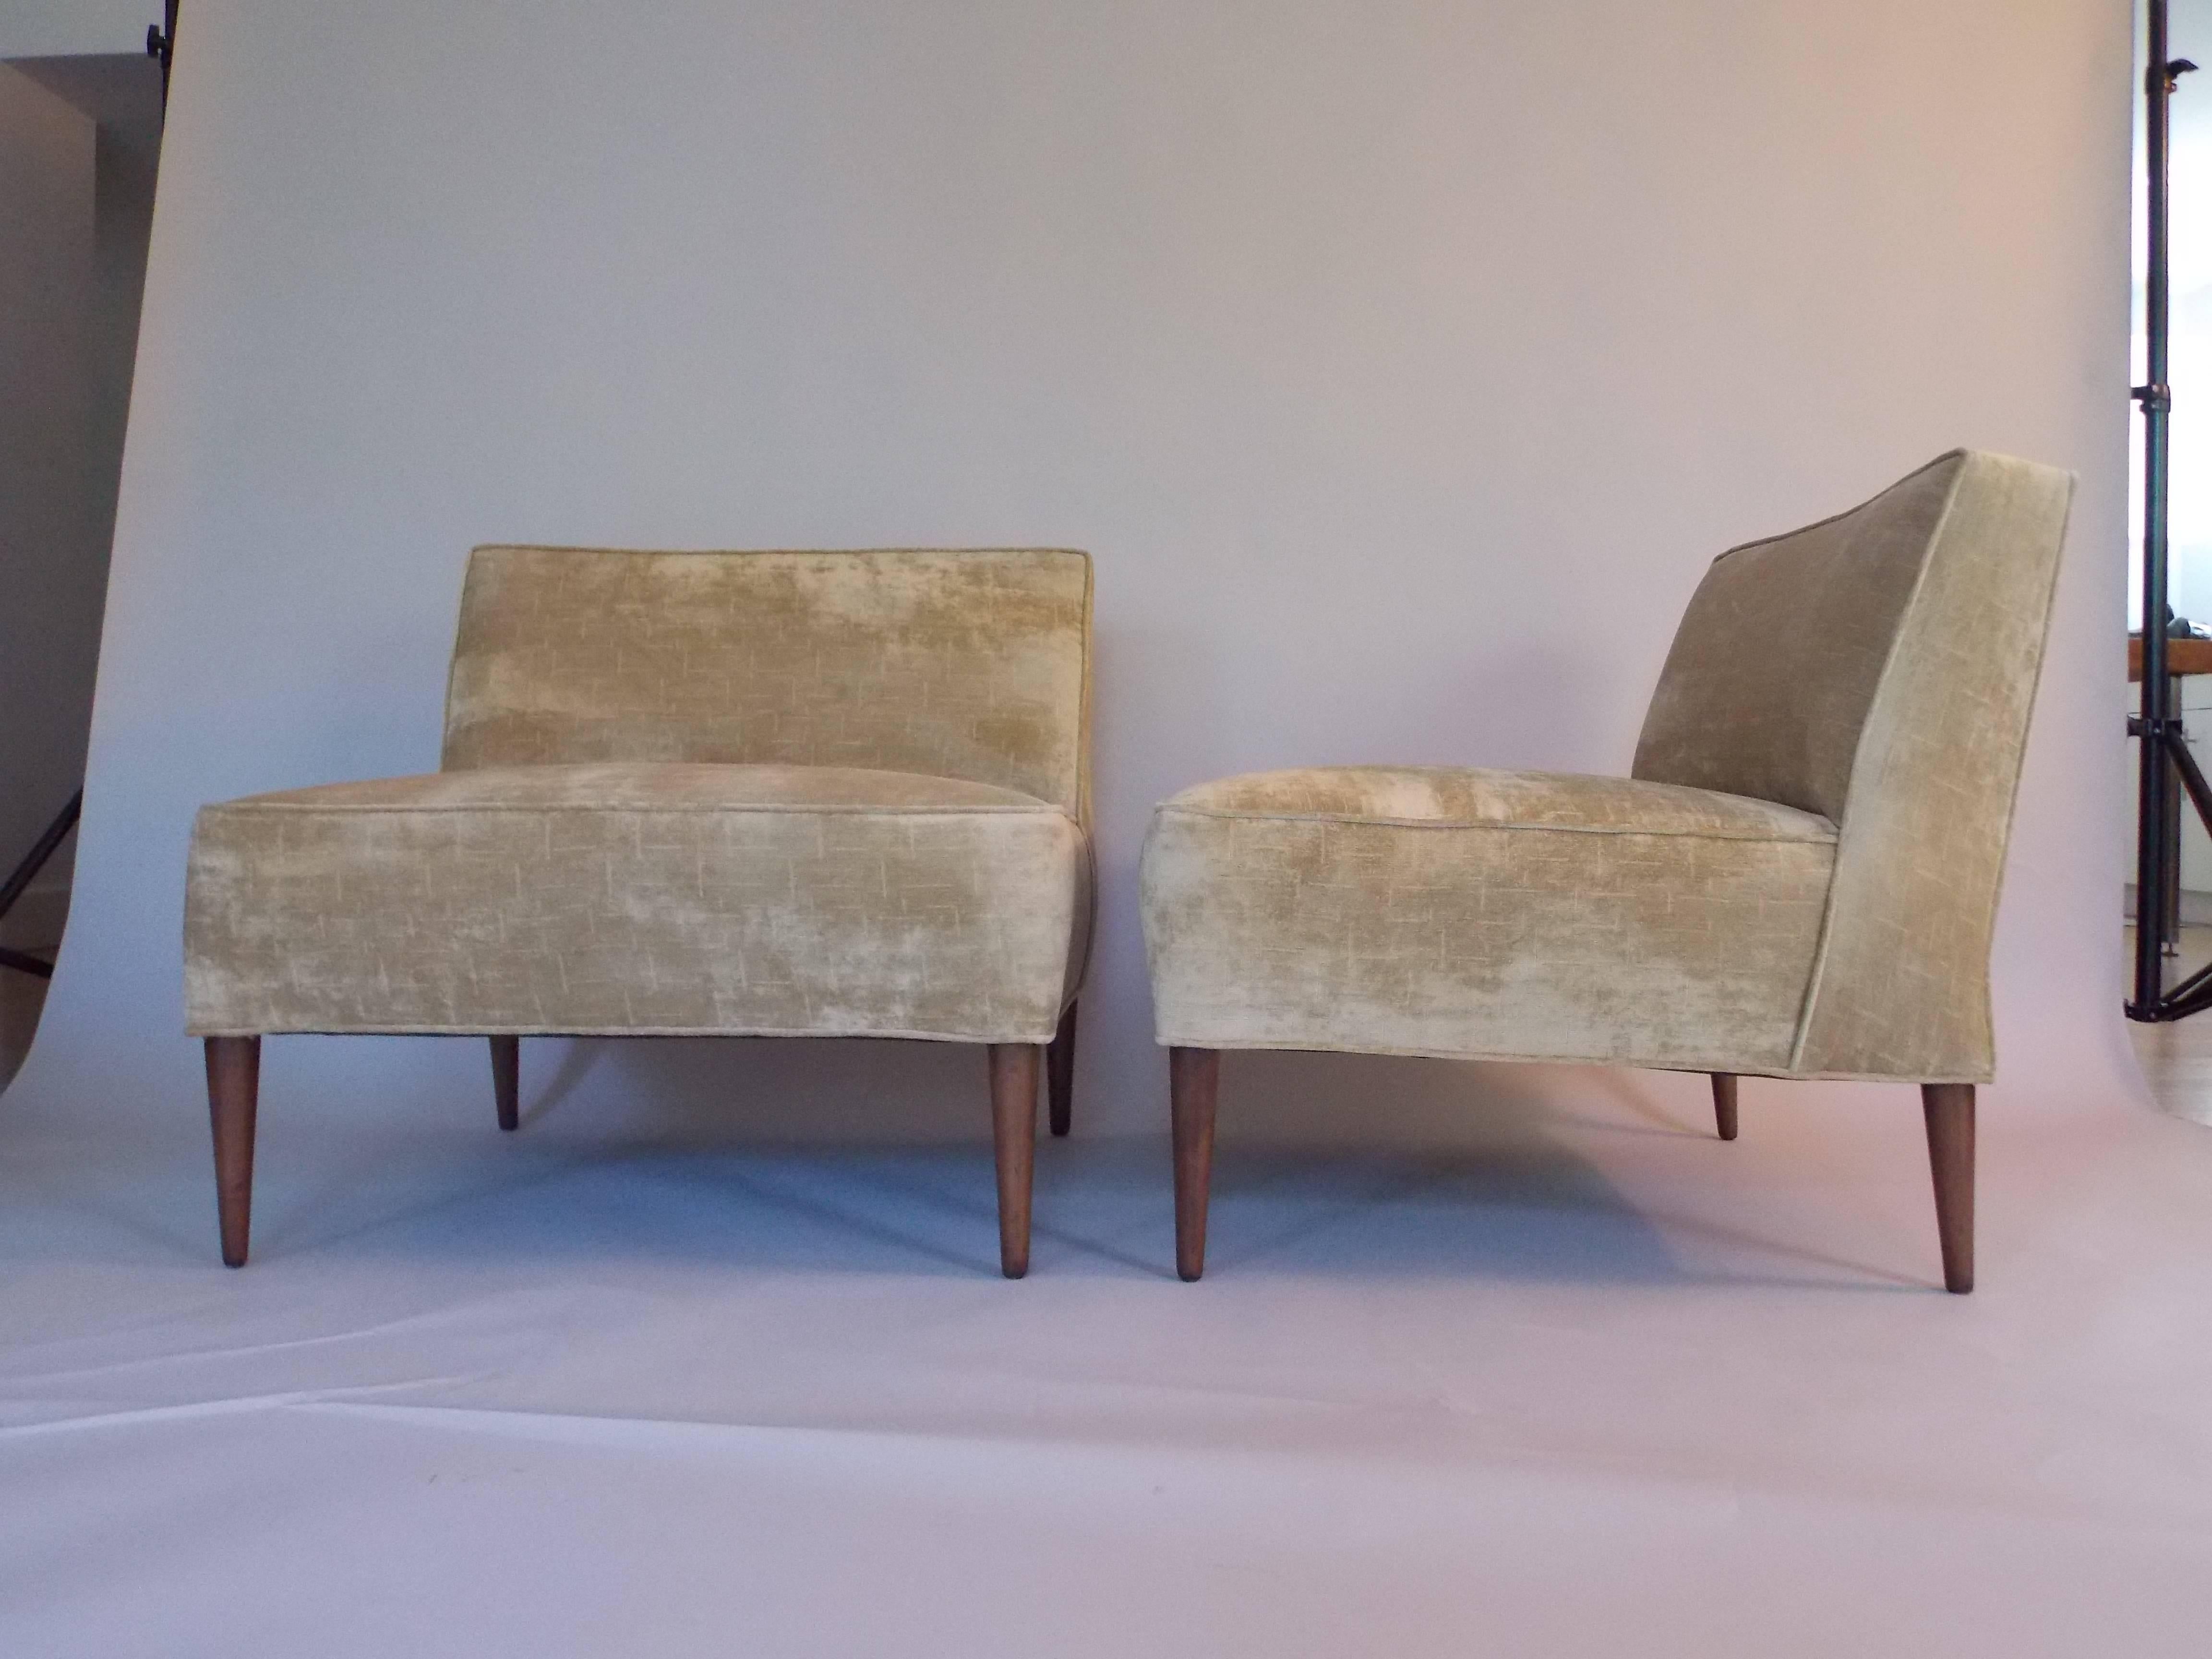 A rare pair of lounge chairs.
Quality made, timeless designs.
These came from an old estate in Pasadena California. 
They were probably a custom design or sold through the Barker Brothers store or from Glenn of California.
They've been restored with